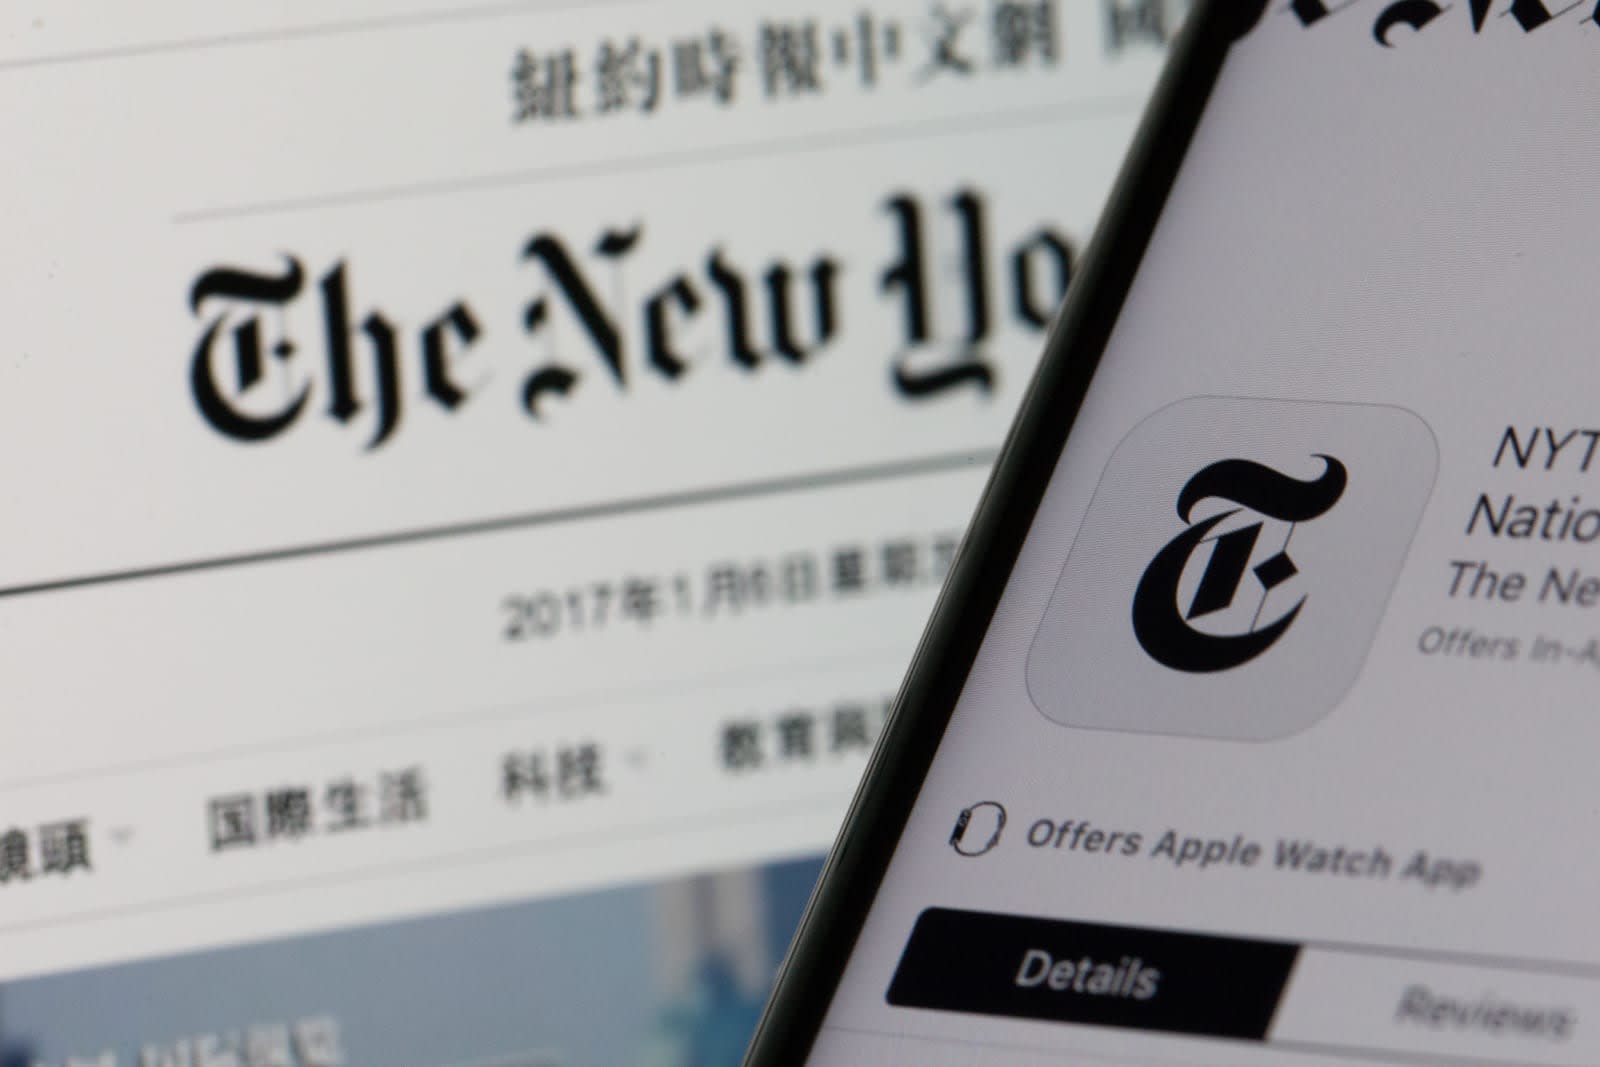 The New York Times bundles Spotify to entice subscribers1600 x 1067